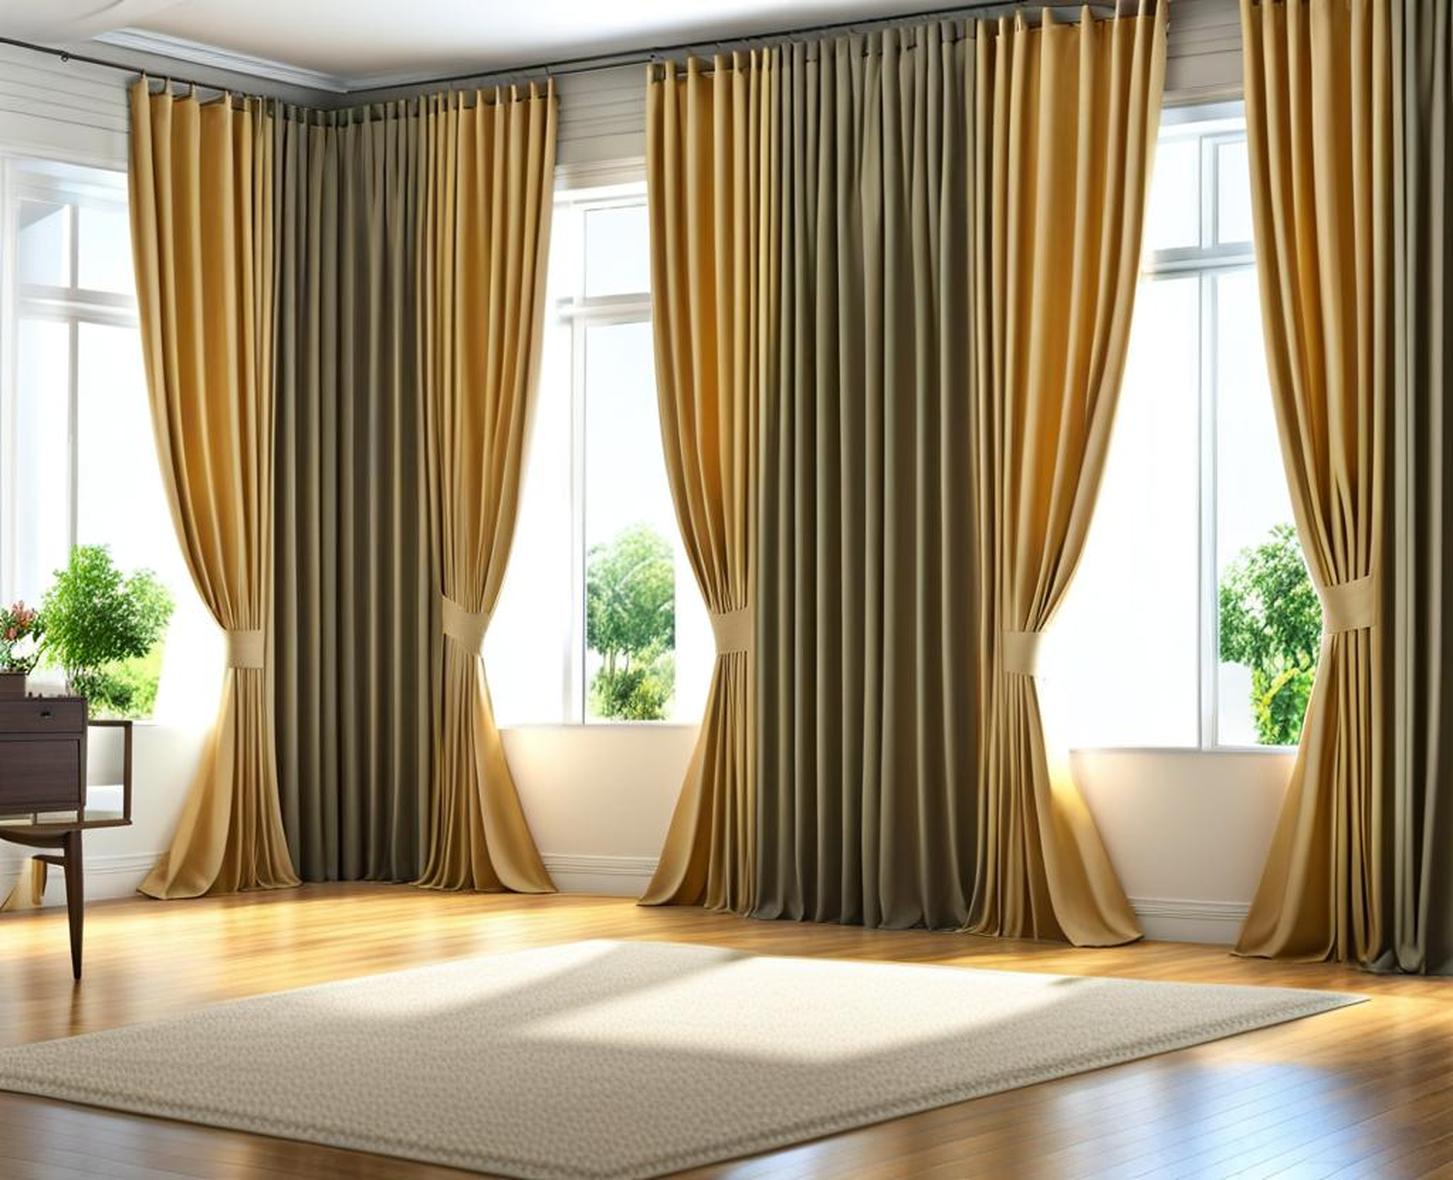 curtain sizes in inches